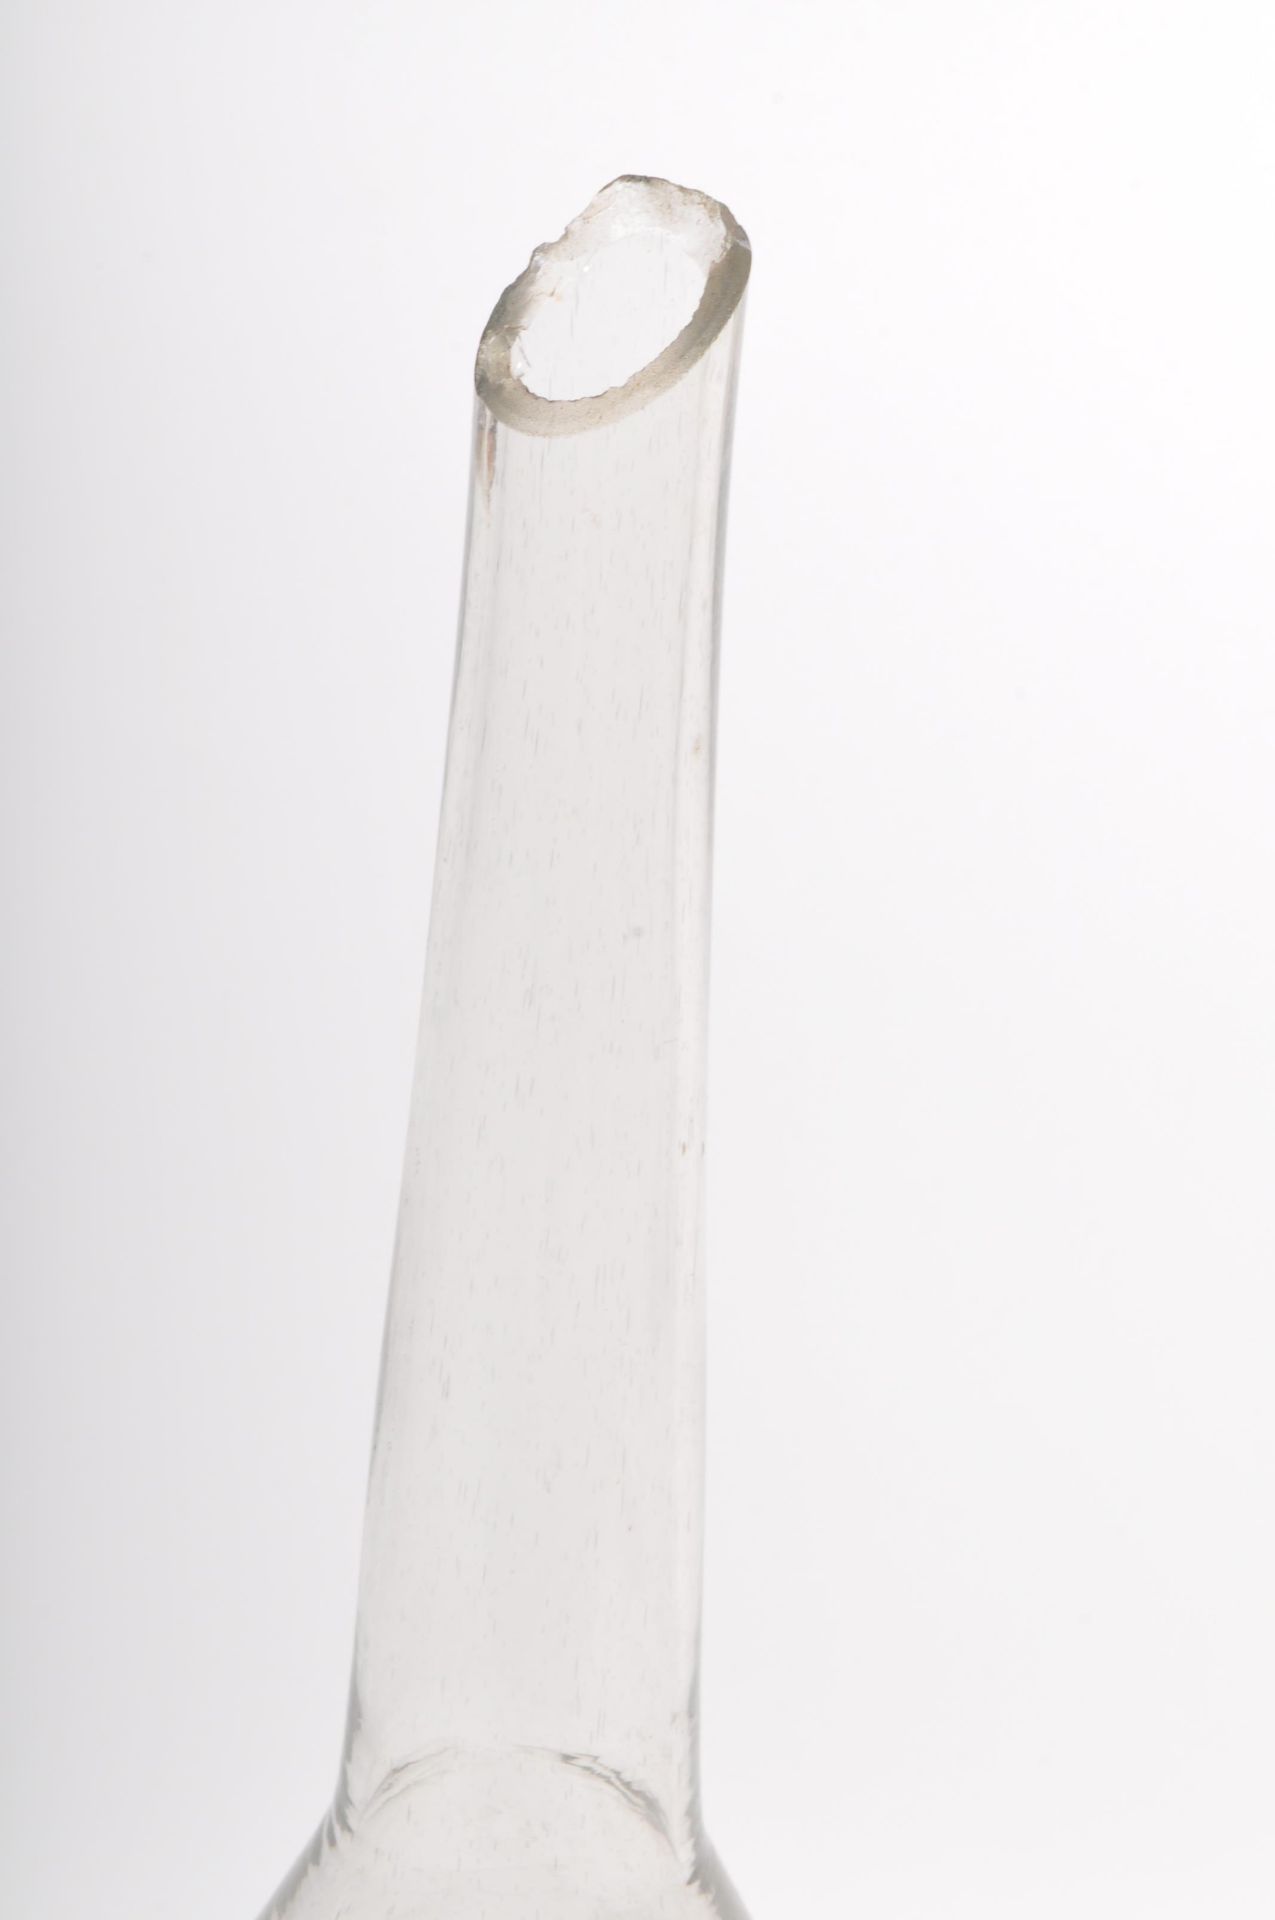 19TH CENTURY GEORGE III LARGE GLASS WINE FUNNEL - Image 4 of 5